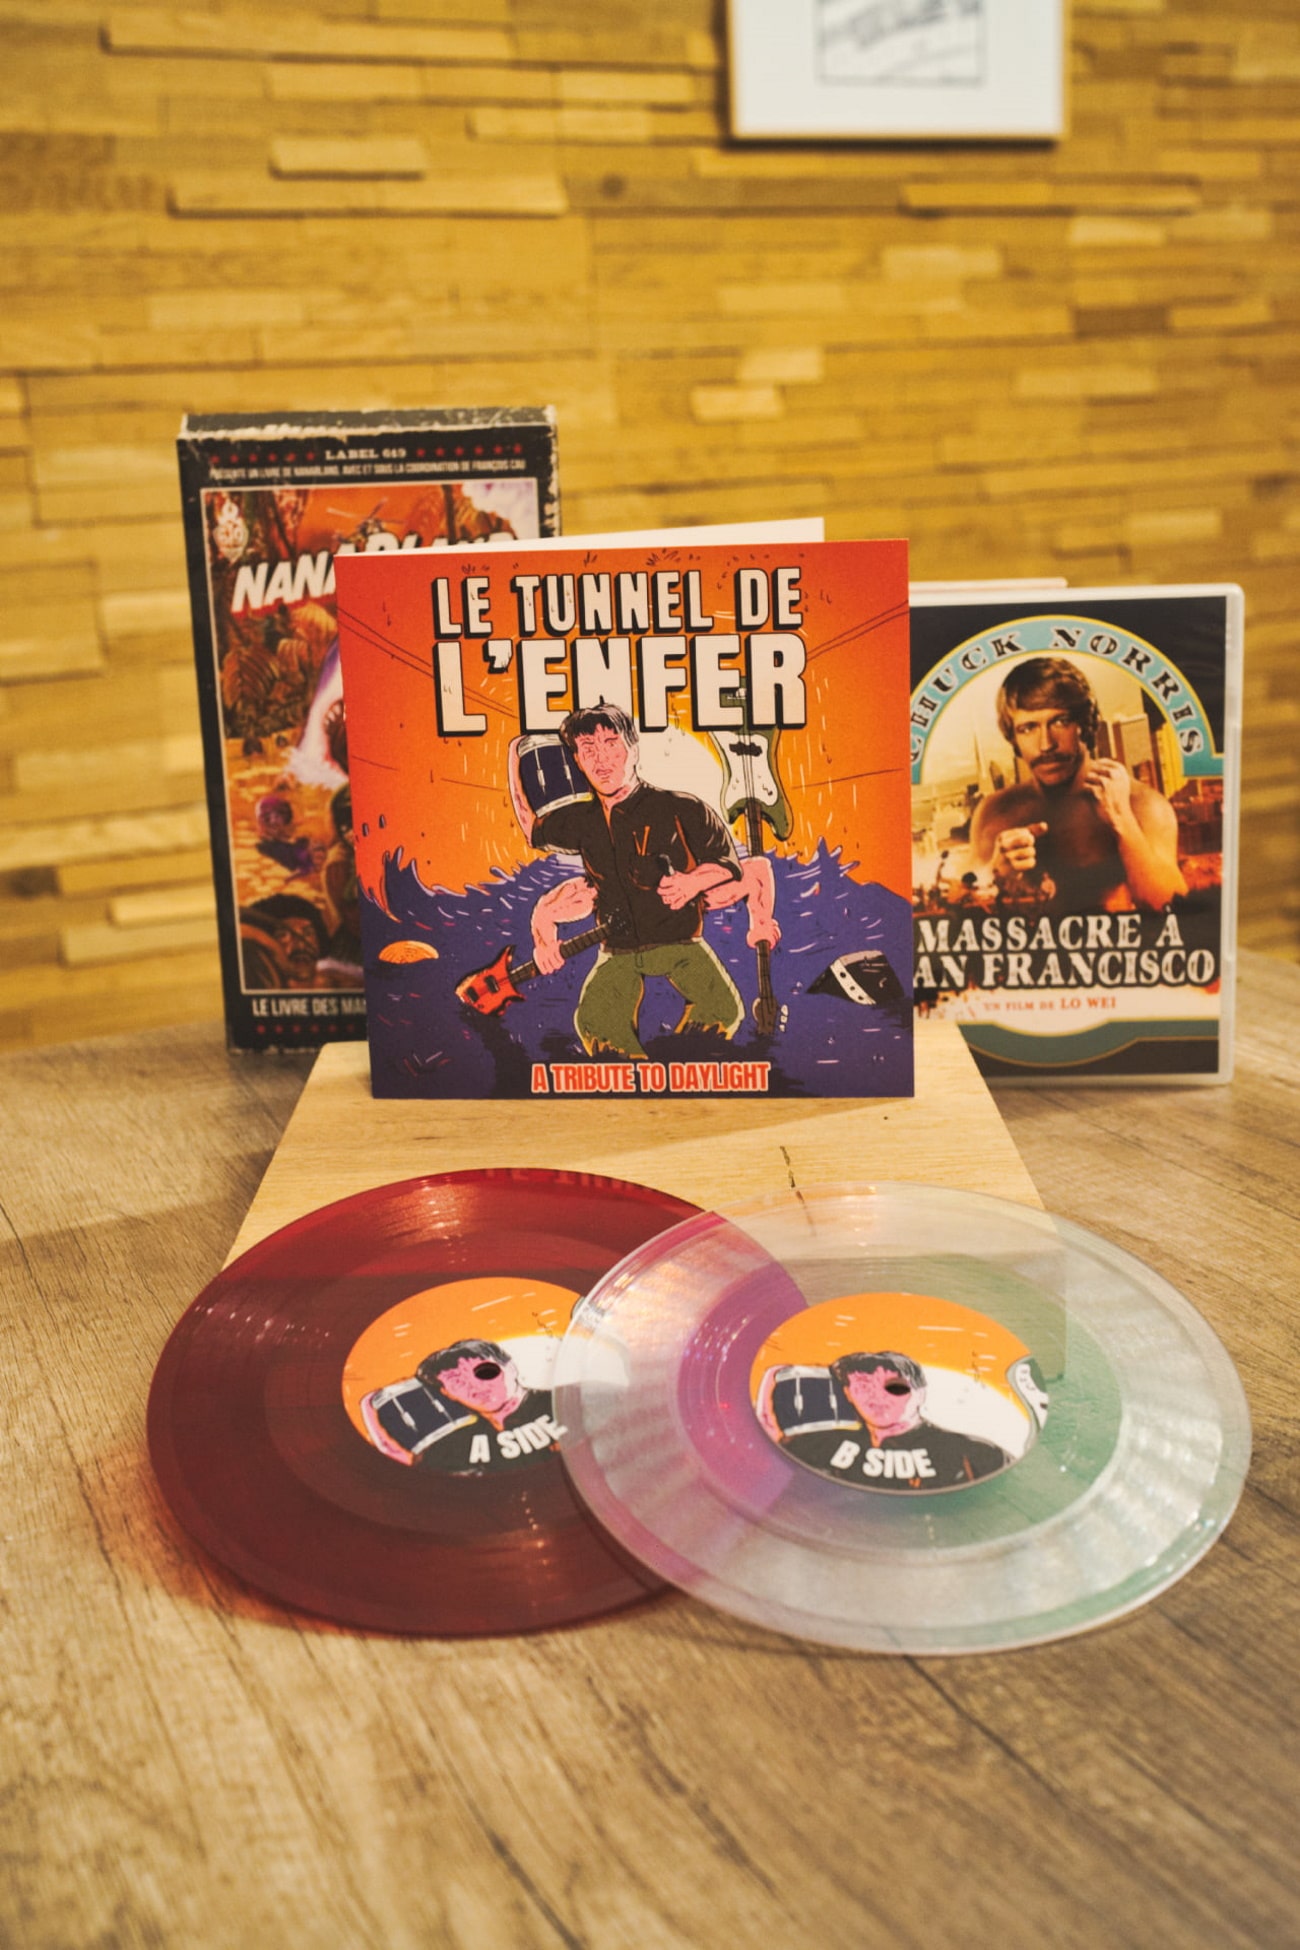 french-fast-punks-le-tunnel-de-lenfer-pay-tribute-to-fun-movies-with-new-action-packed-ep-a-tribute-to-daylight